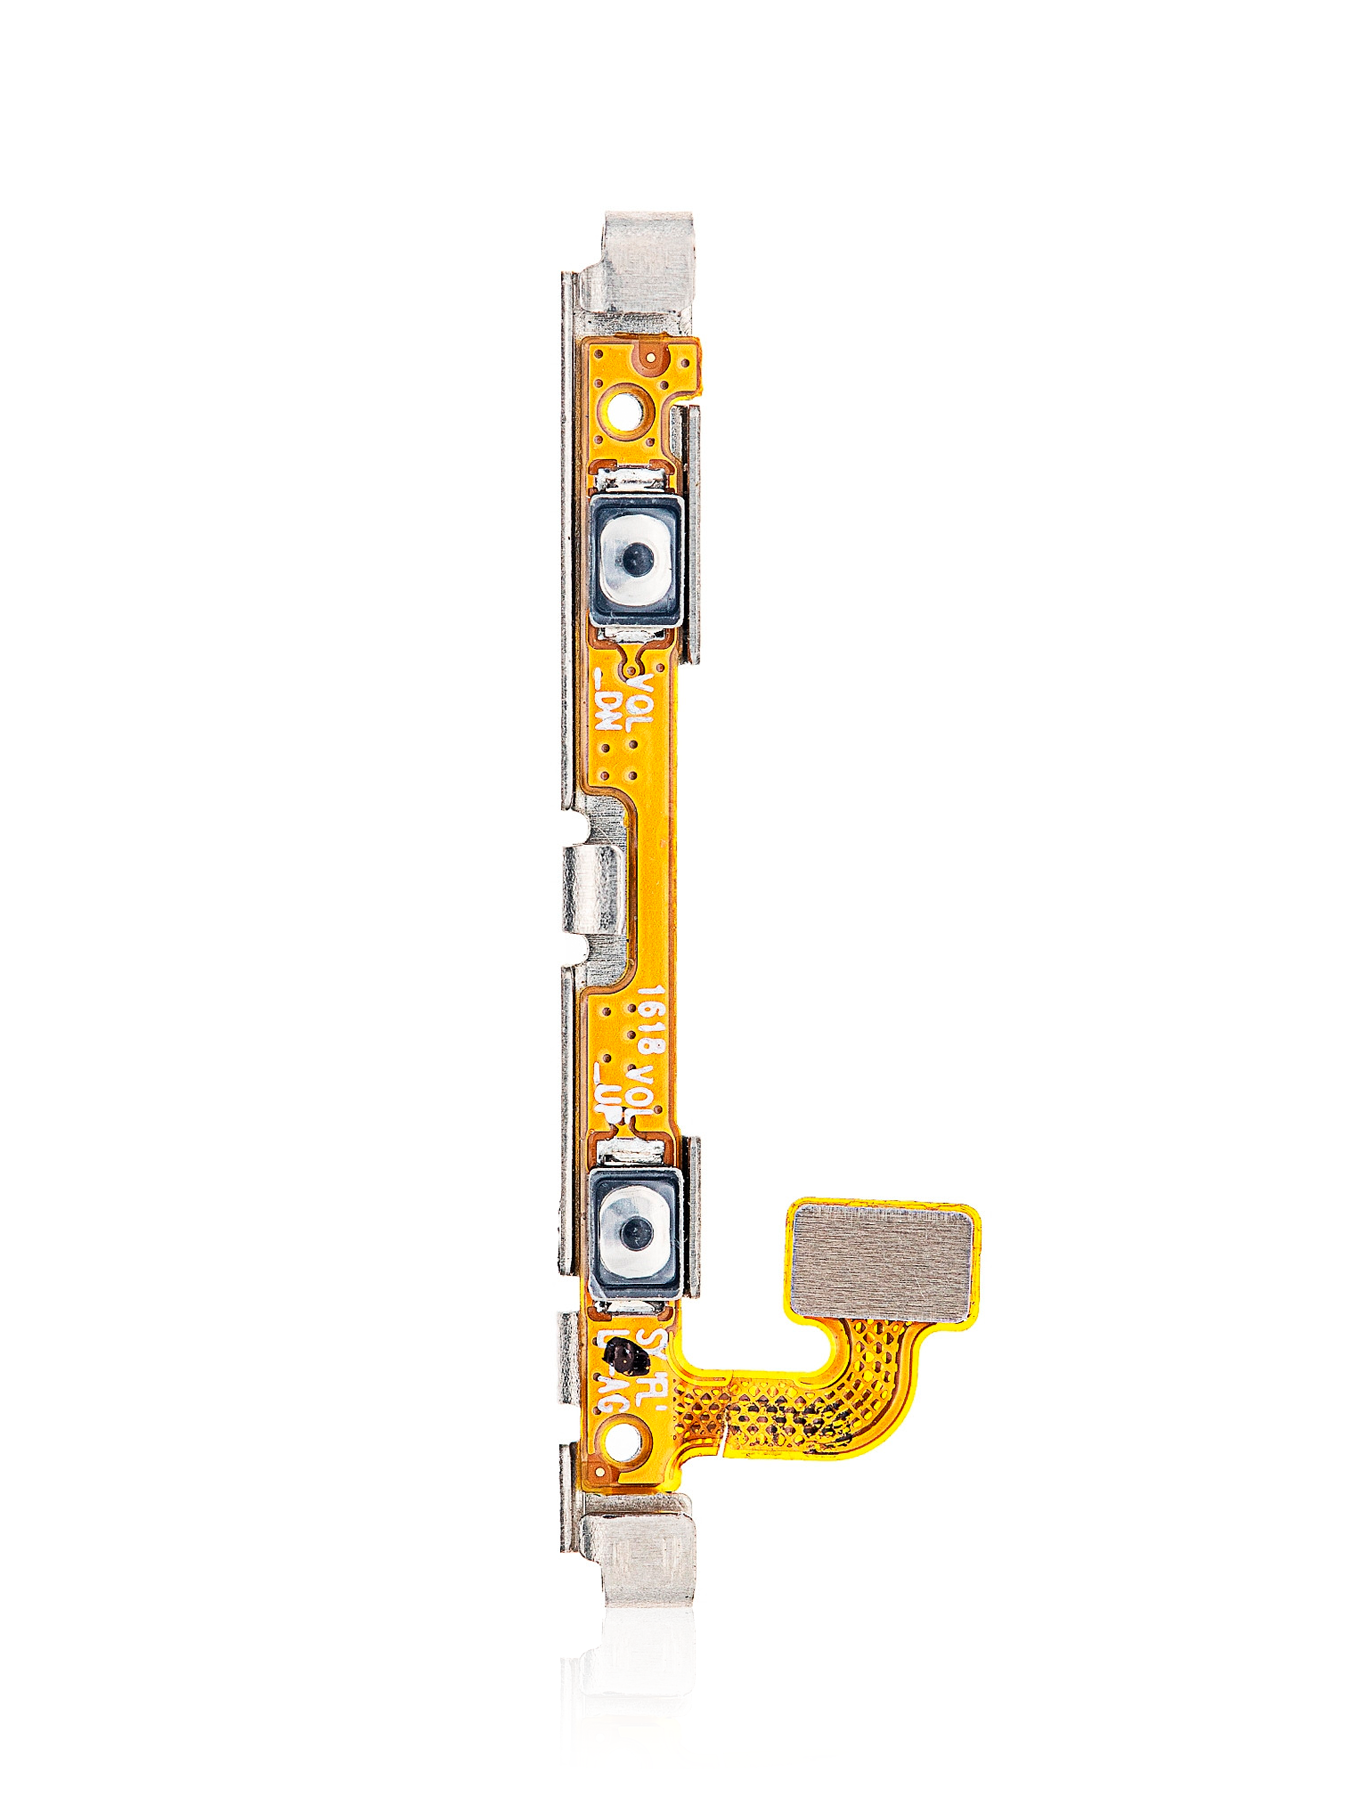 For Samsung Galaxy S7 Edge Volume Button Flex Cable Replacement